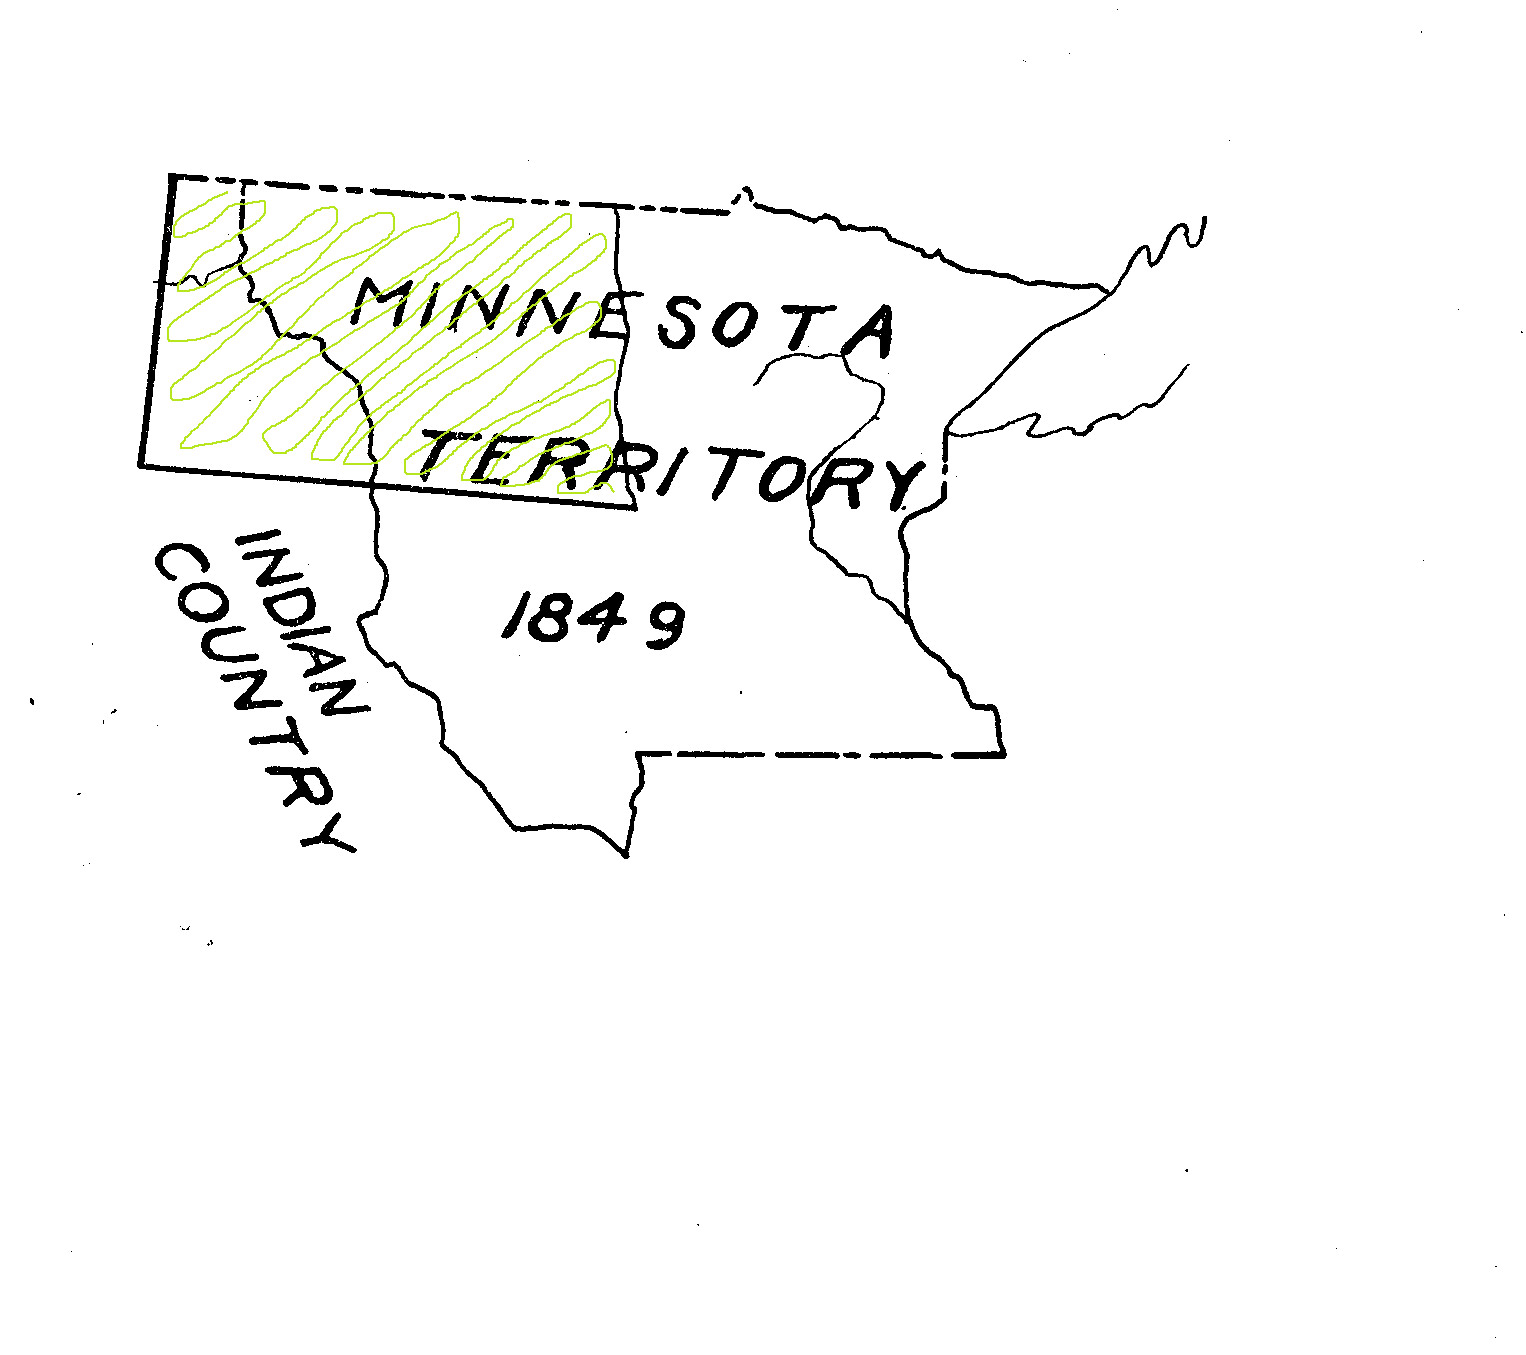 In 1849, Minnesota Territory took on the eastern portion of North and South Dakota. Though this territory was smaller than some of the earlier sprawling territories, Minnesota gave little attention to any part west of the Red River except for the small border community of Pembina.